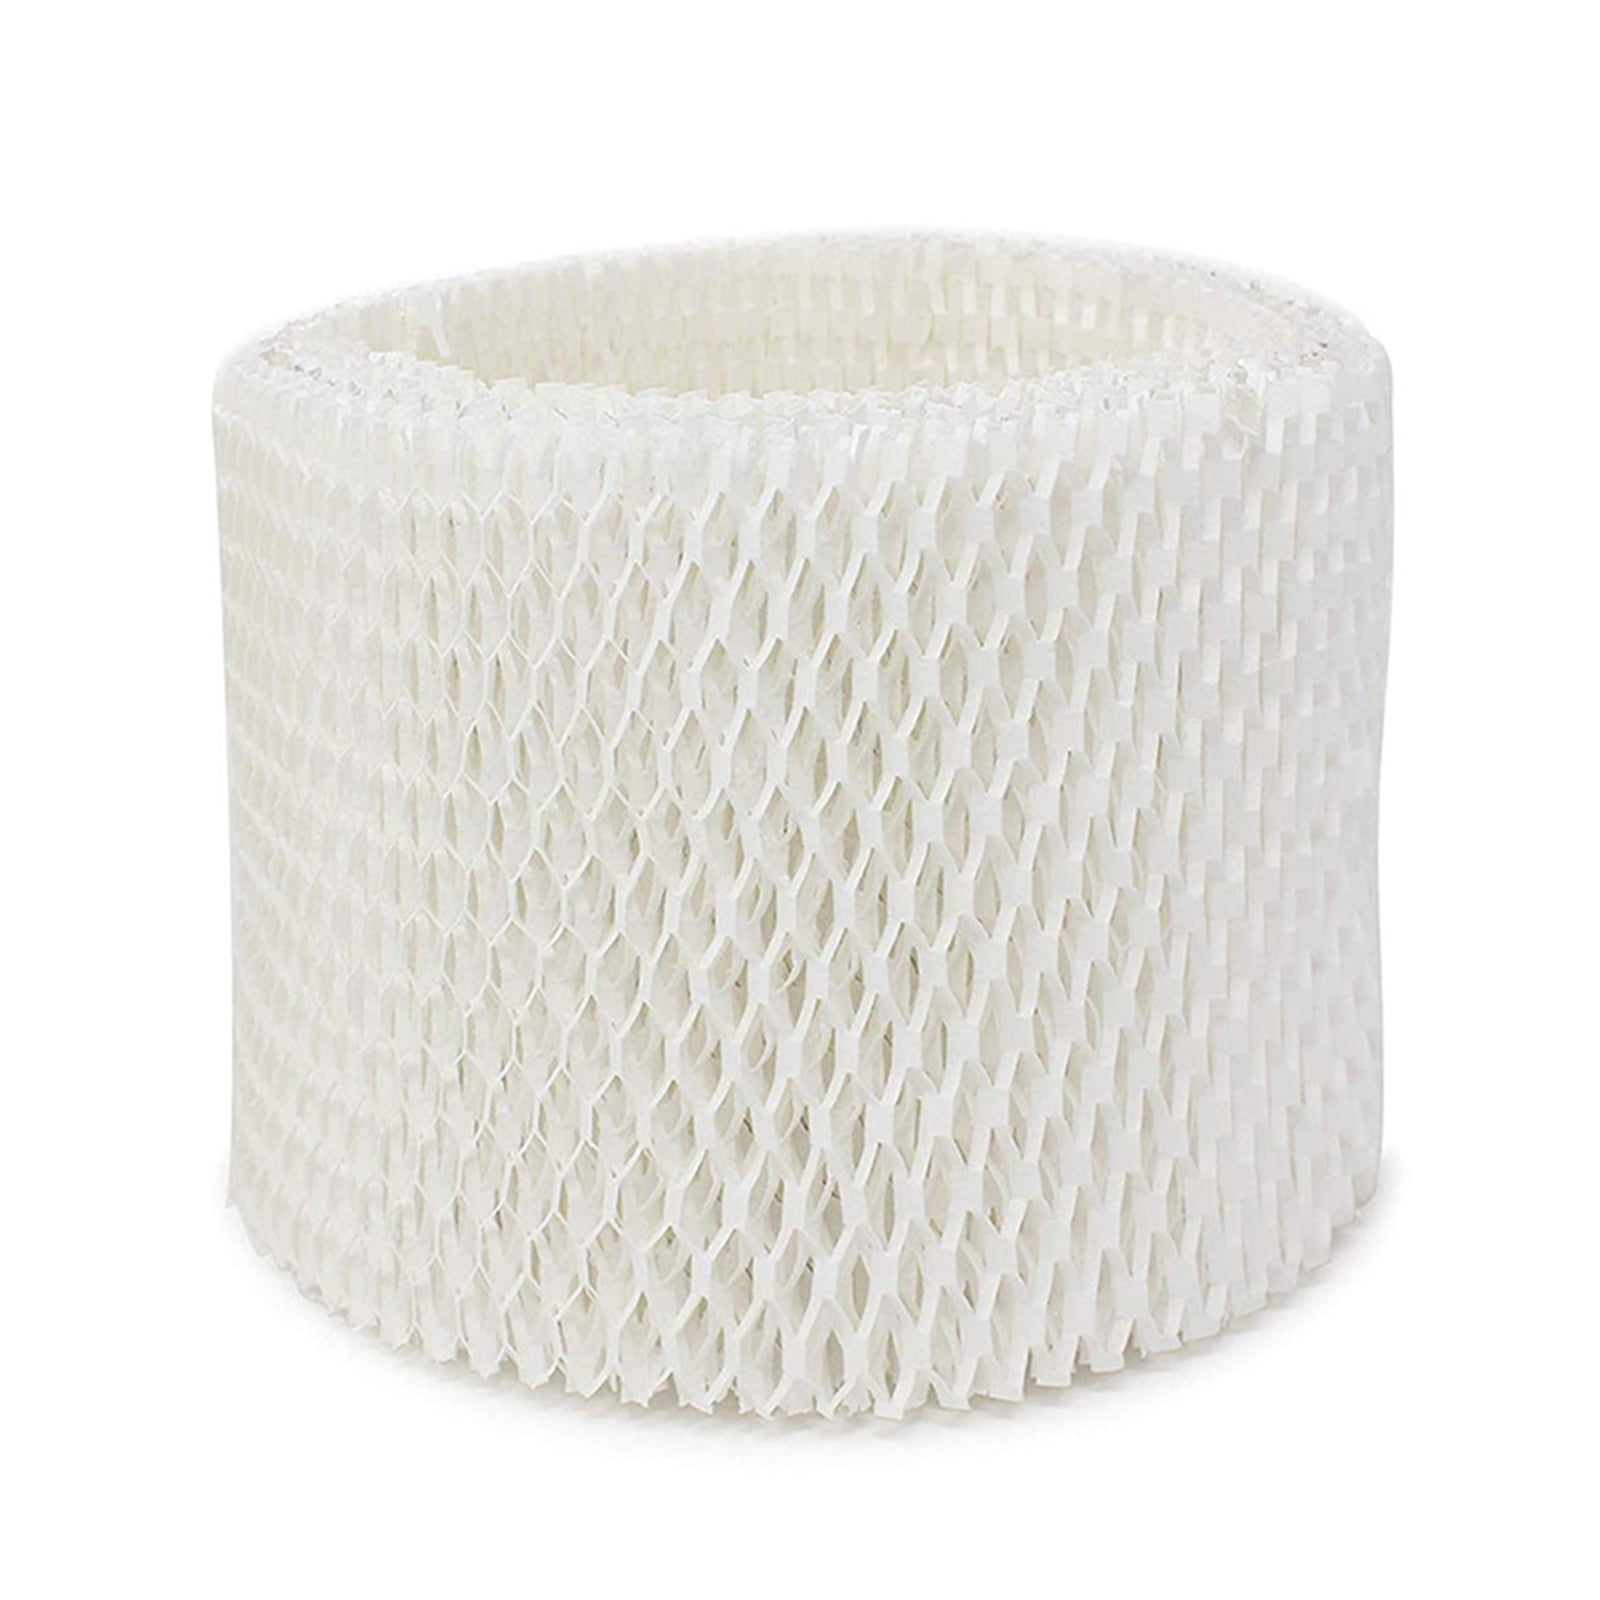 Replacement Filter D for Honeywell HWF75 Bionaire W and BCM Series Humidifiers 